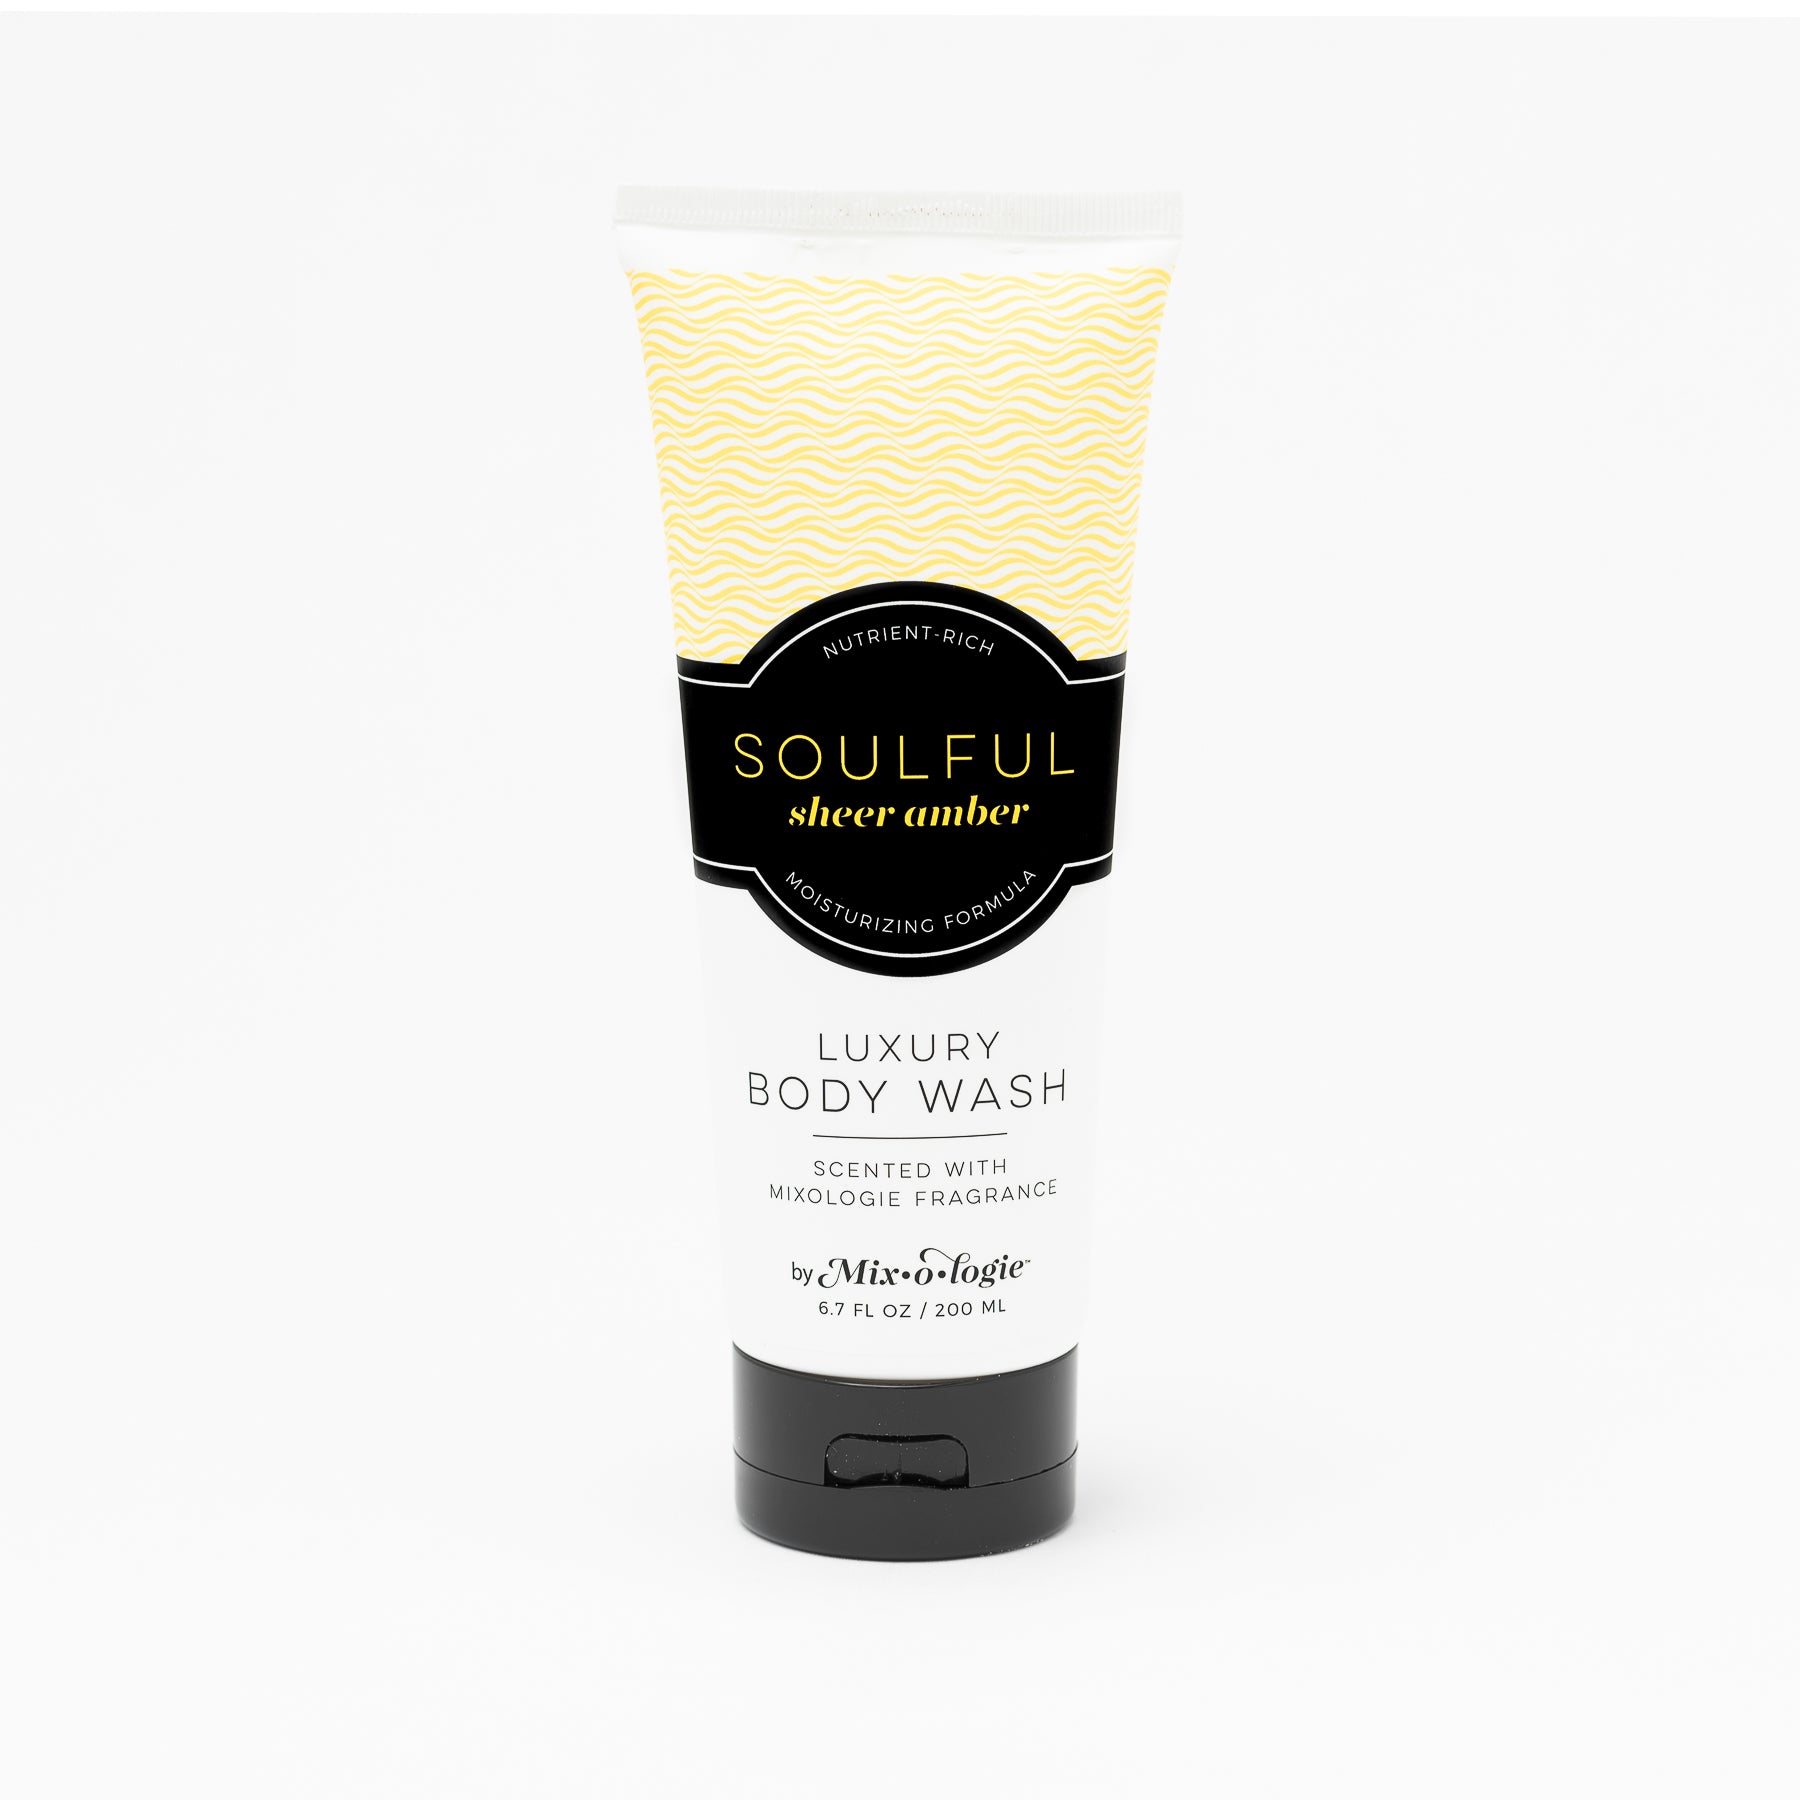 Luxury Body Wash in Mixologie’s Soulful (Sheer Amber) in bright yellow color sample package with black label. Contains 6.7 fl oz or 200 mL pictured on a white background. 